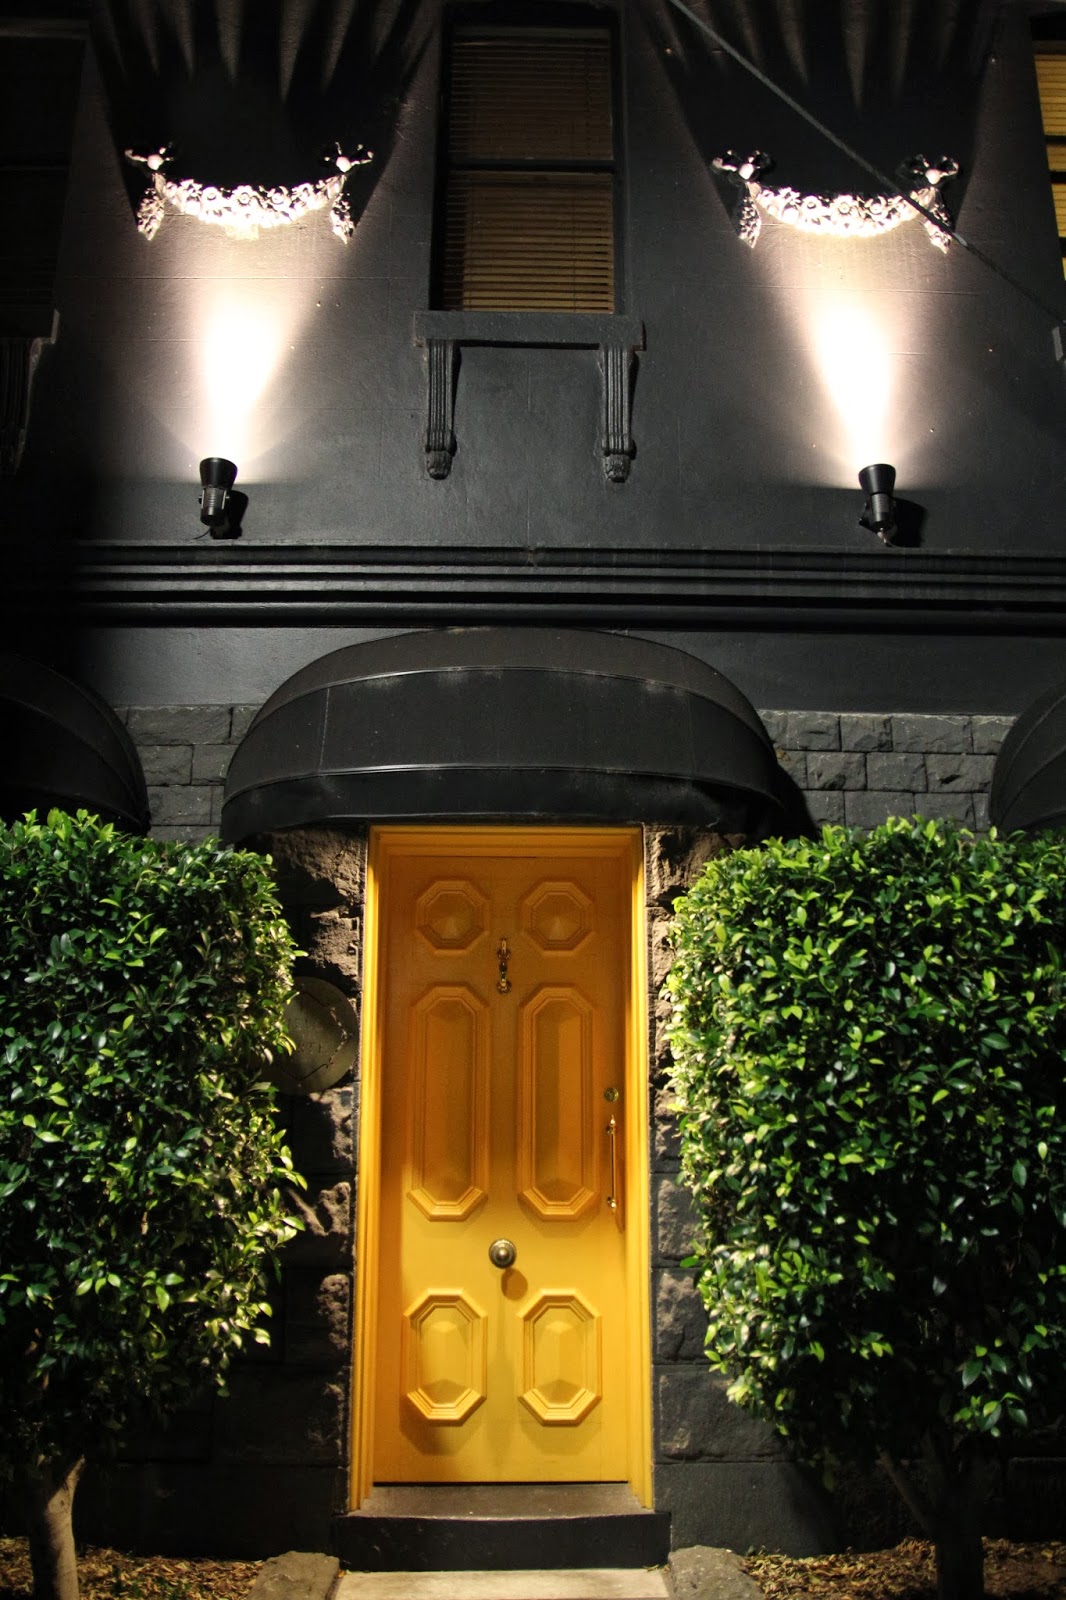 A building at night with a yellow door 